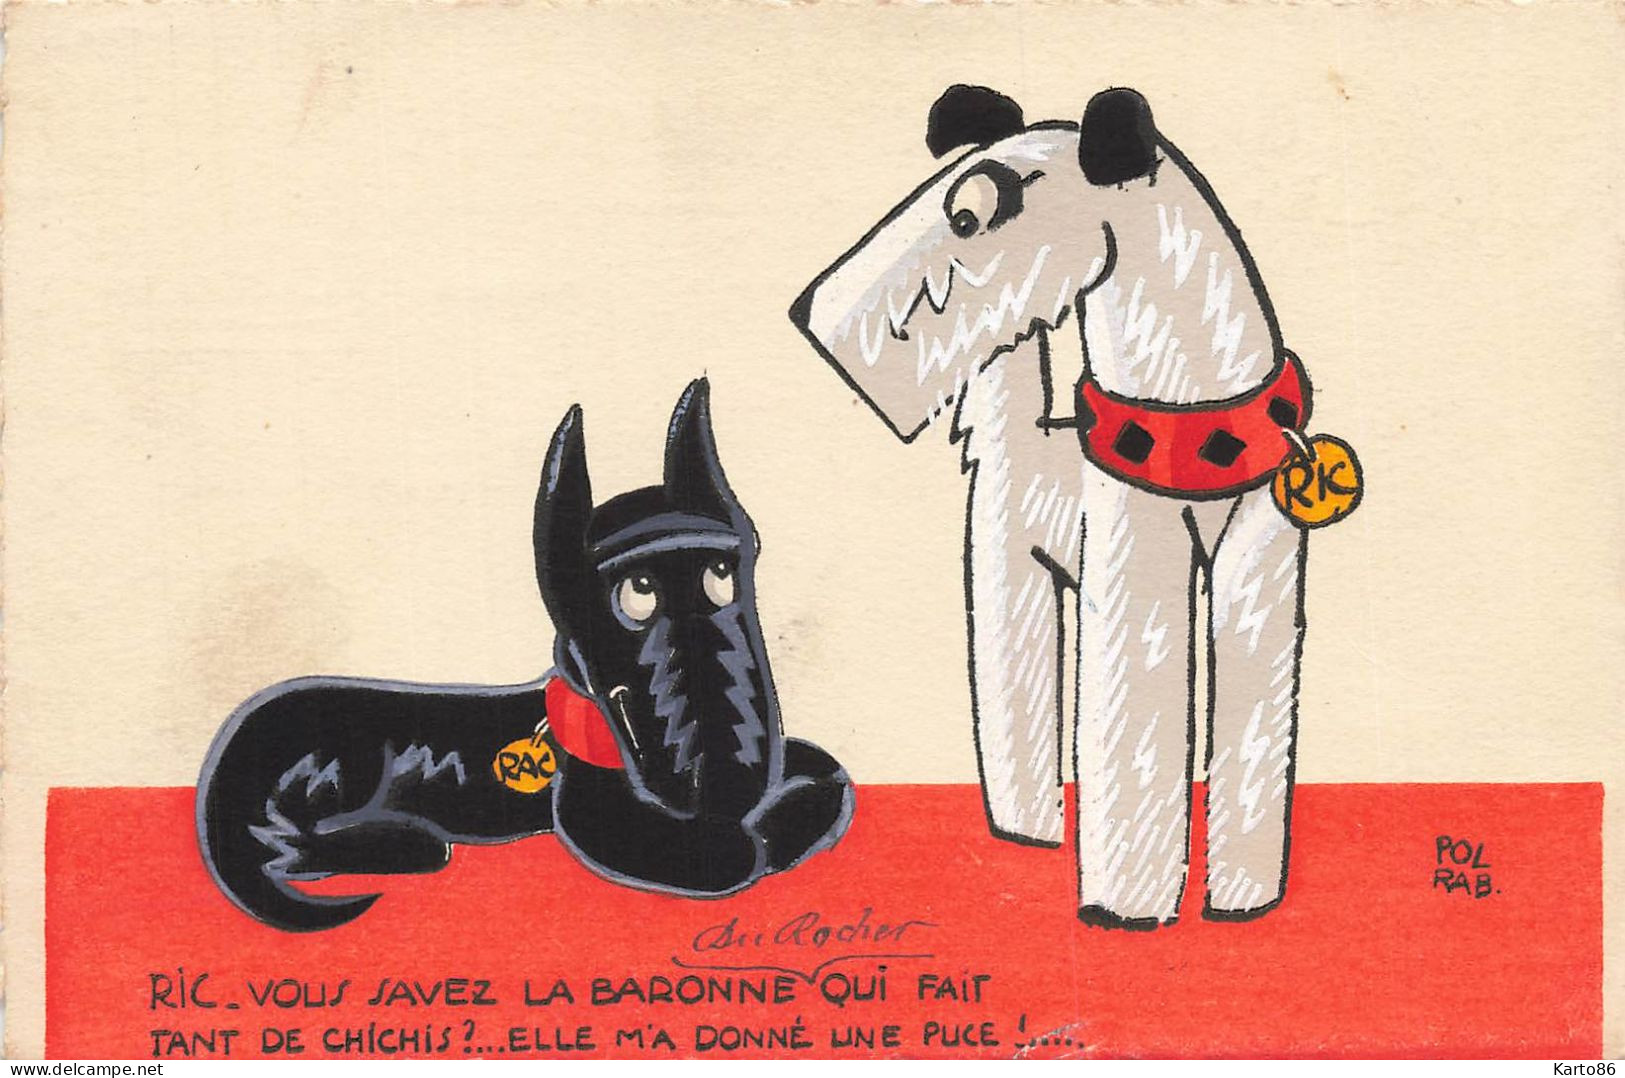 Chiens * CPA Illustrateur POL RAB Pol Rab * Ric ... ! * Carte Postale TUCK * Chien Dog Dogs - Chiens